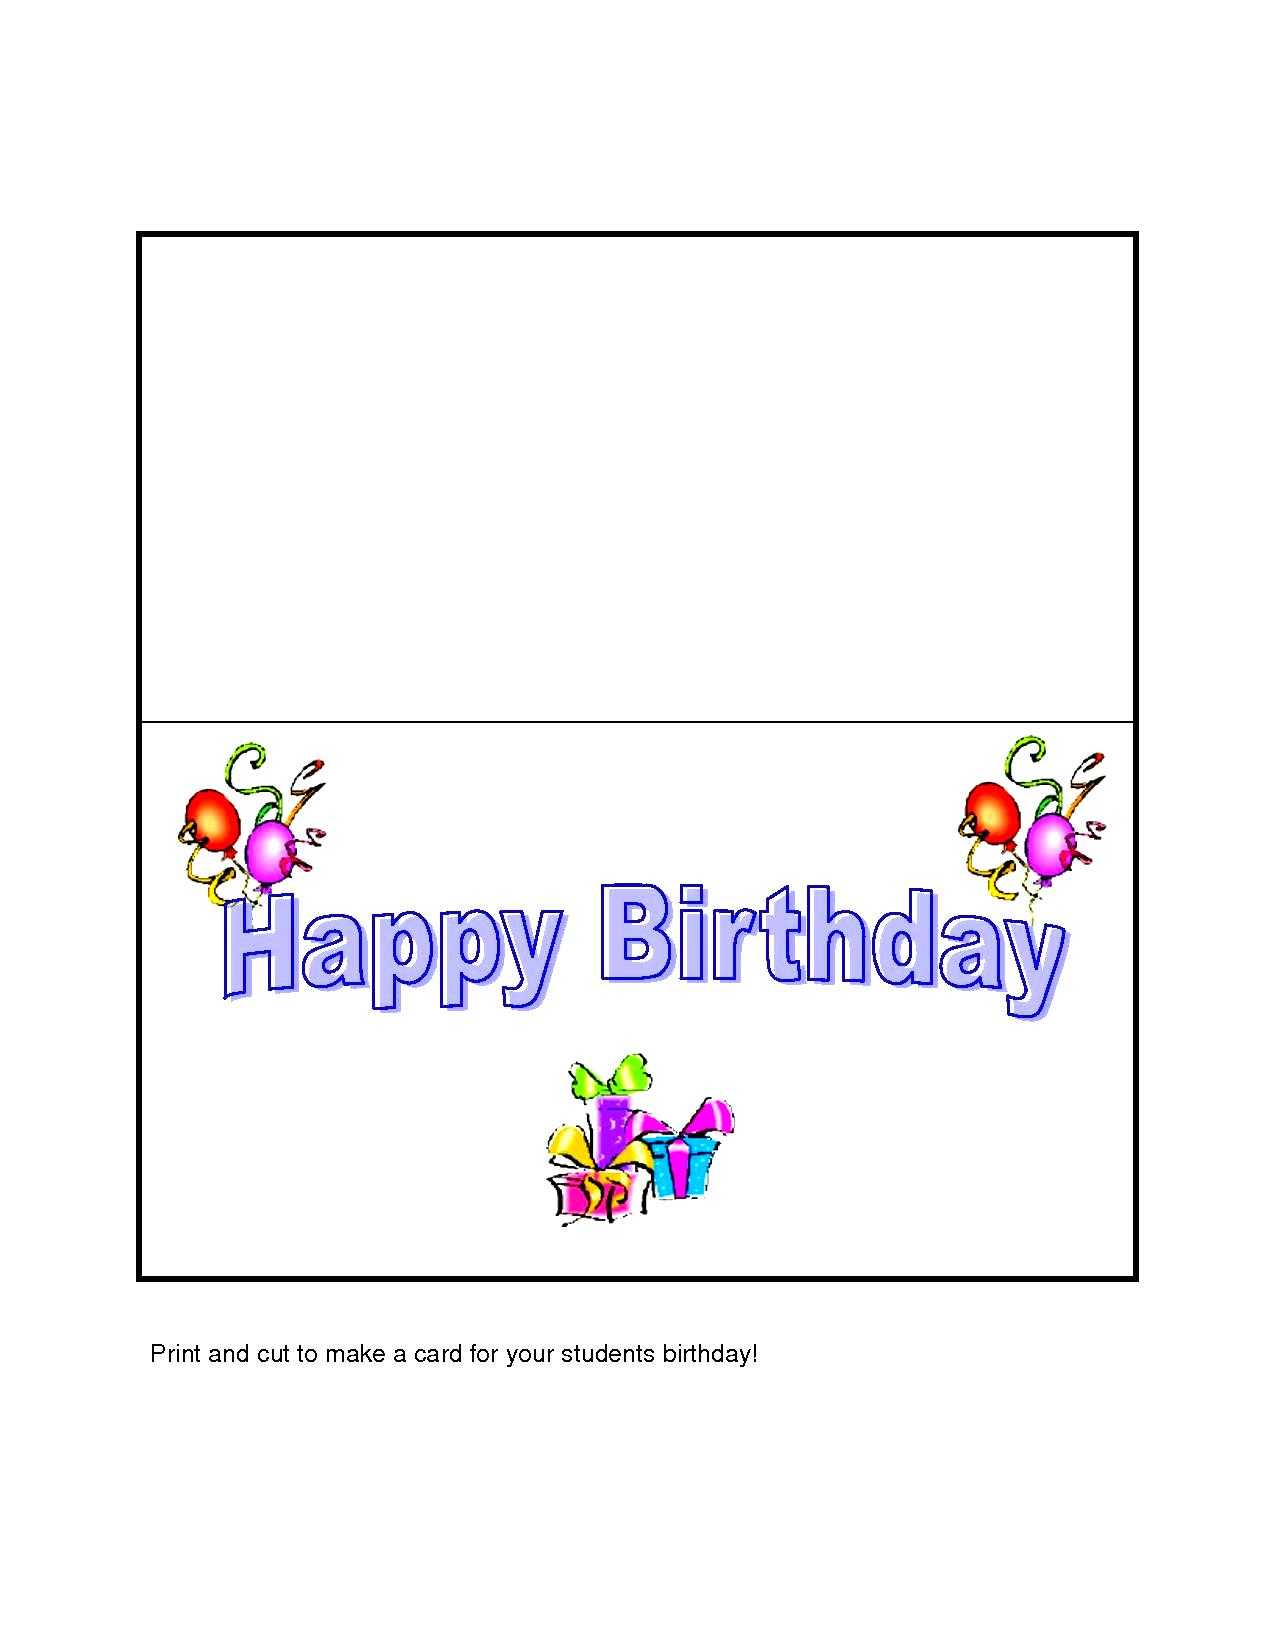 17 Images Of Birthday Party Card Template | Splinket With Microsoft Word Birthday Card Template